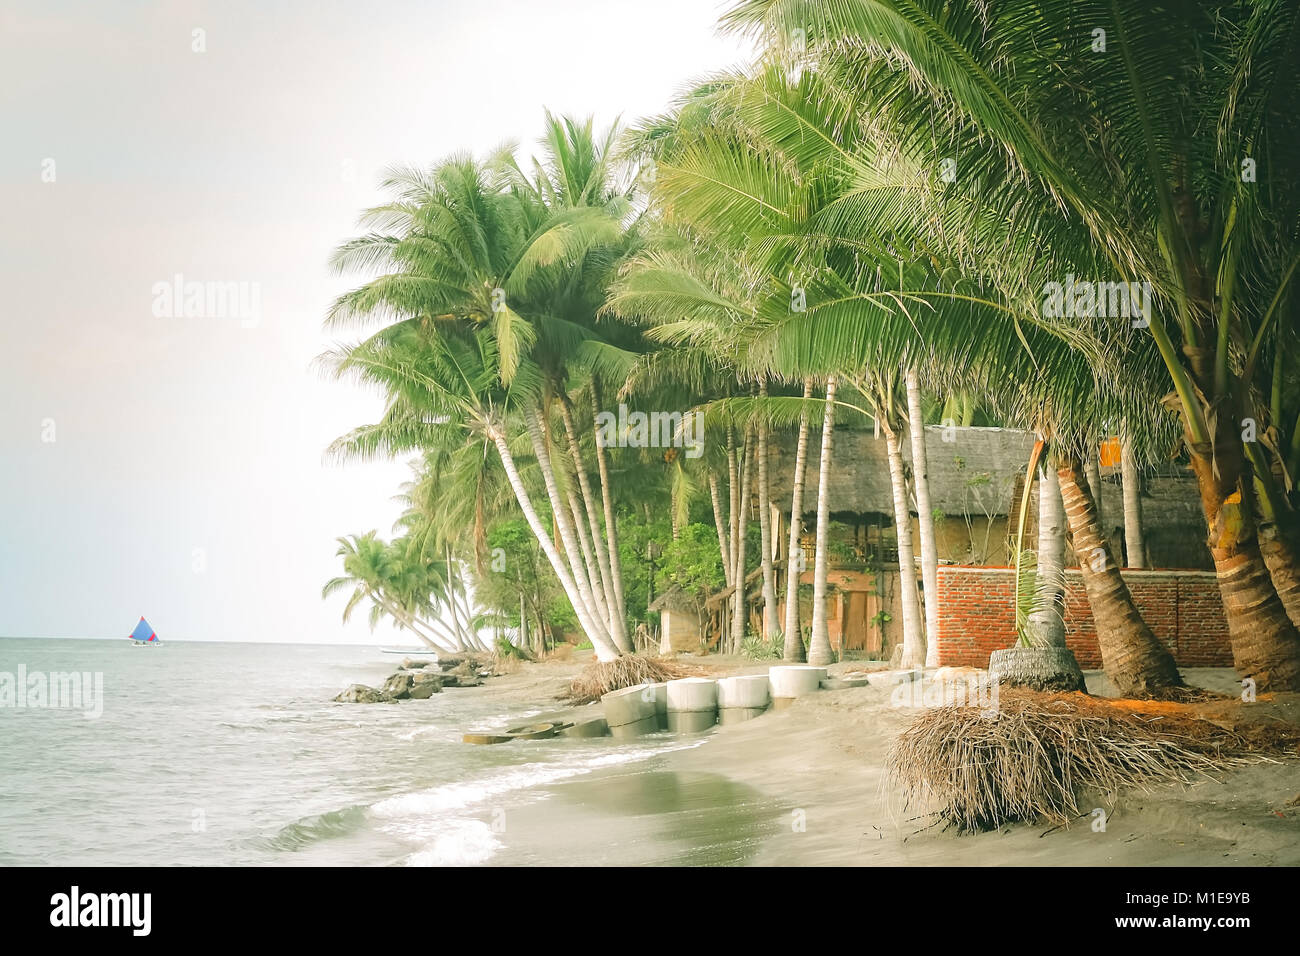 Palmtrees on the beach in a small village on the Lombok island, Indonesia, Asia Stock Photo